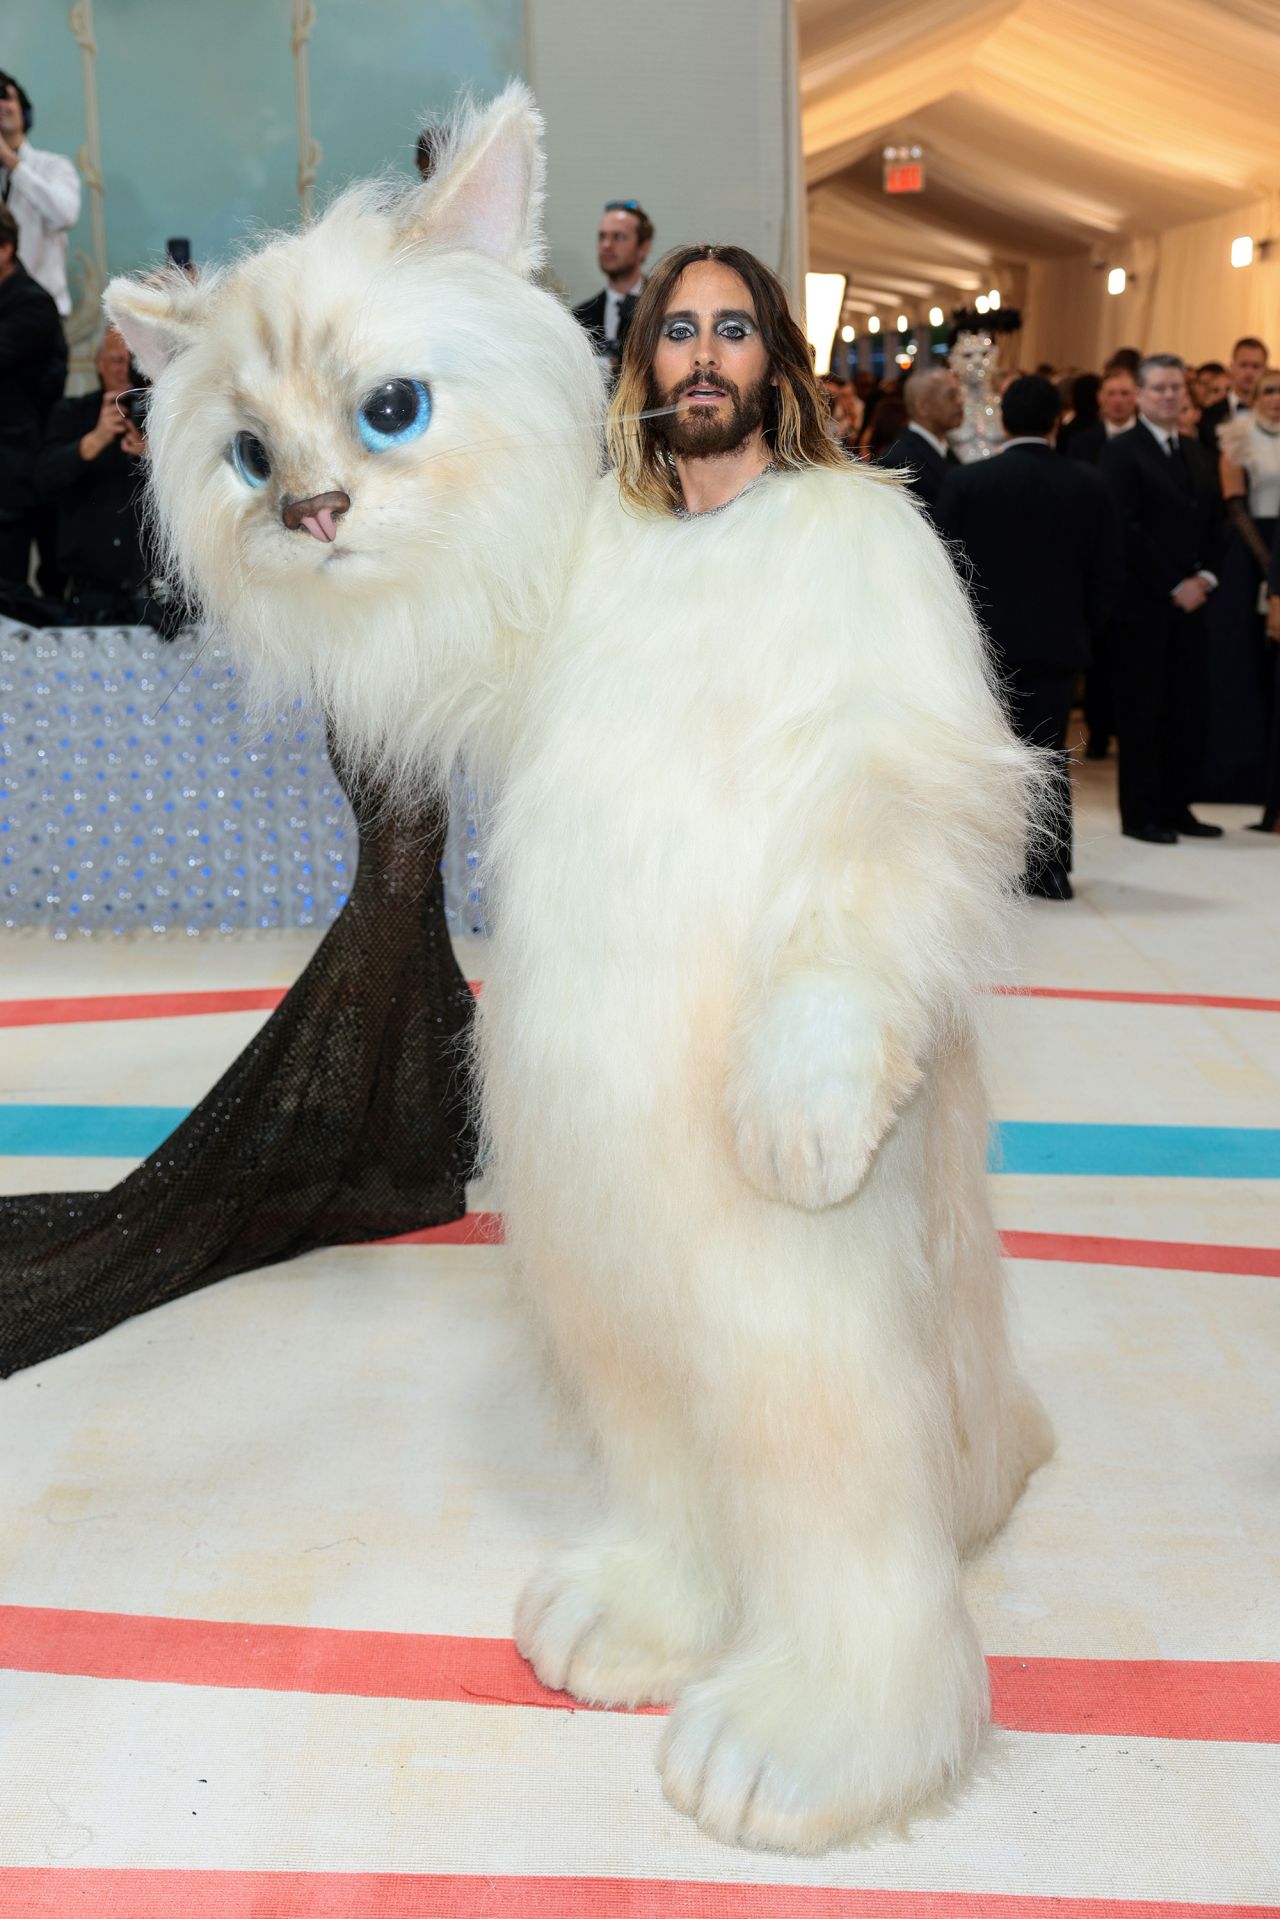 Jared Leto arrived in a full cat costume in honor of Karl Lagerfeld's pet, Choupette.